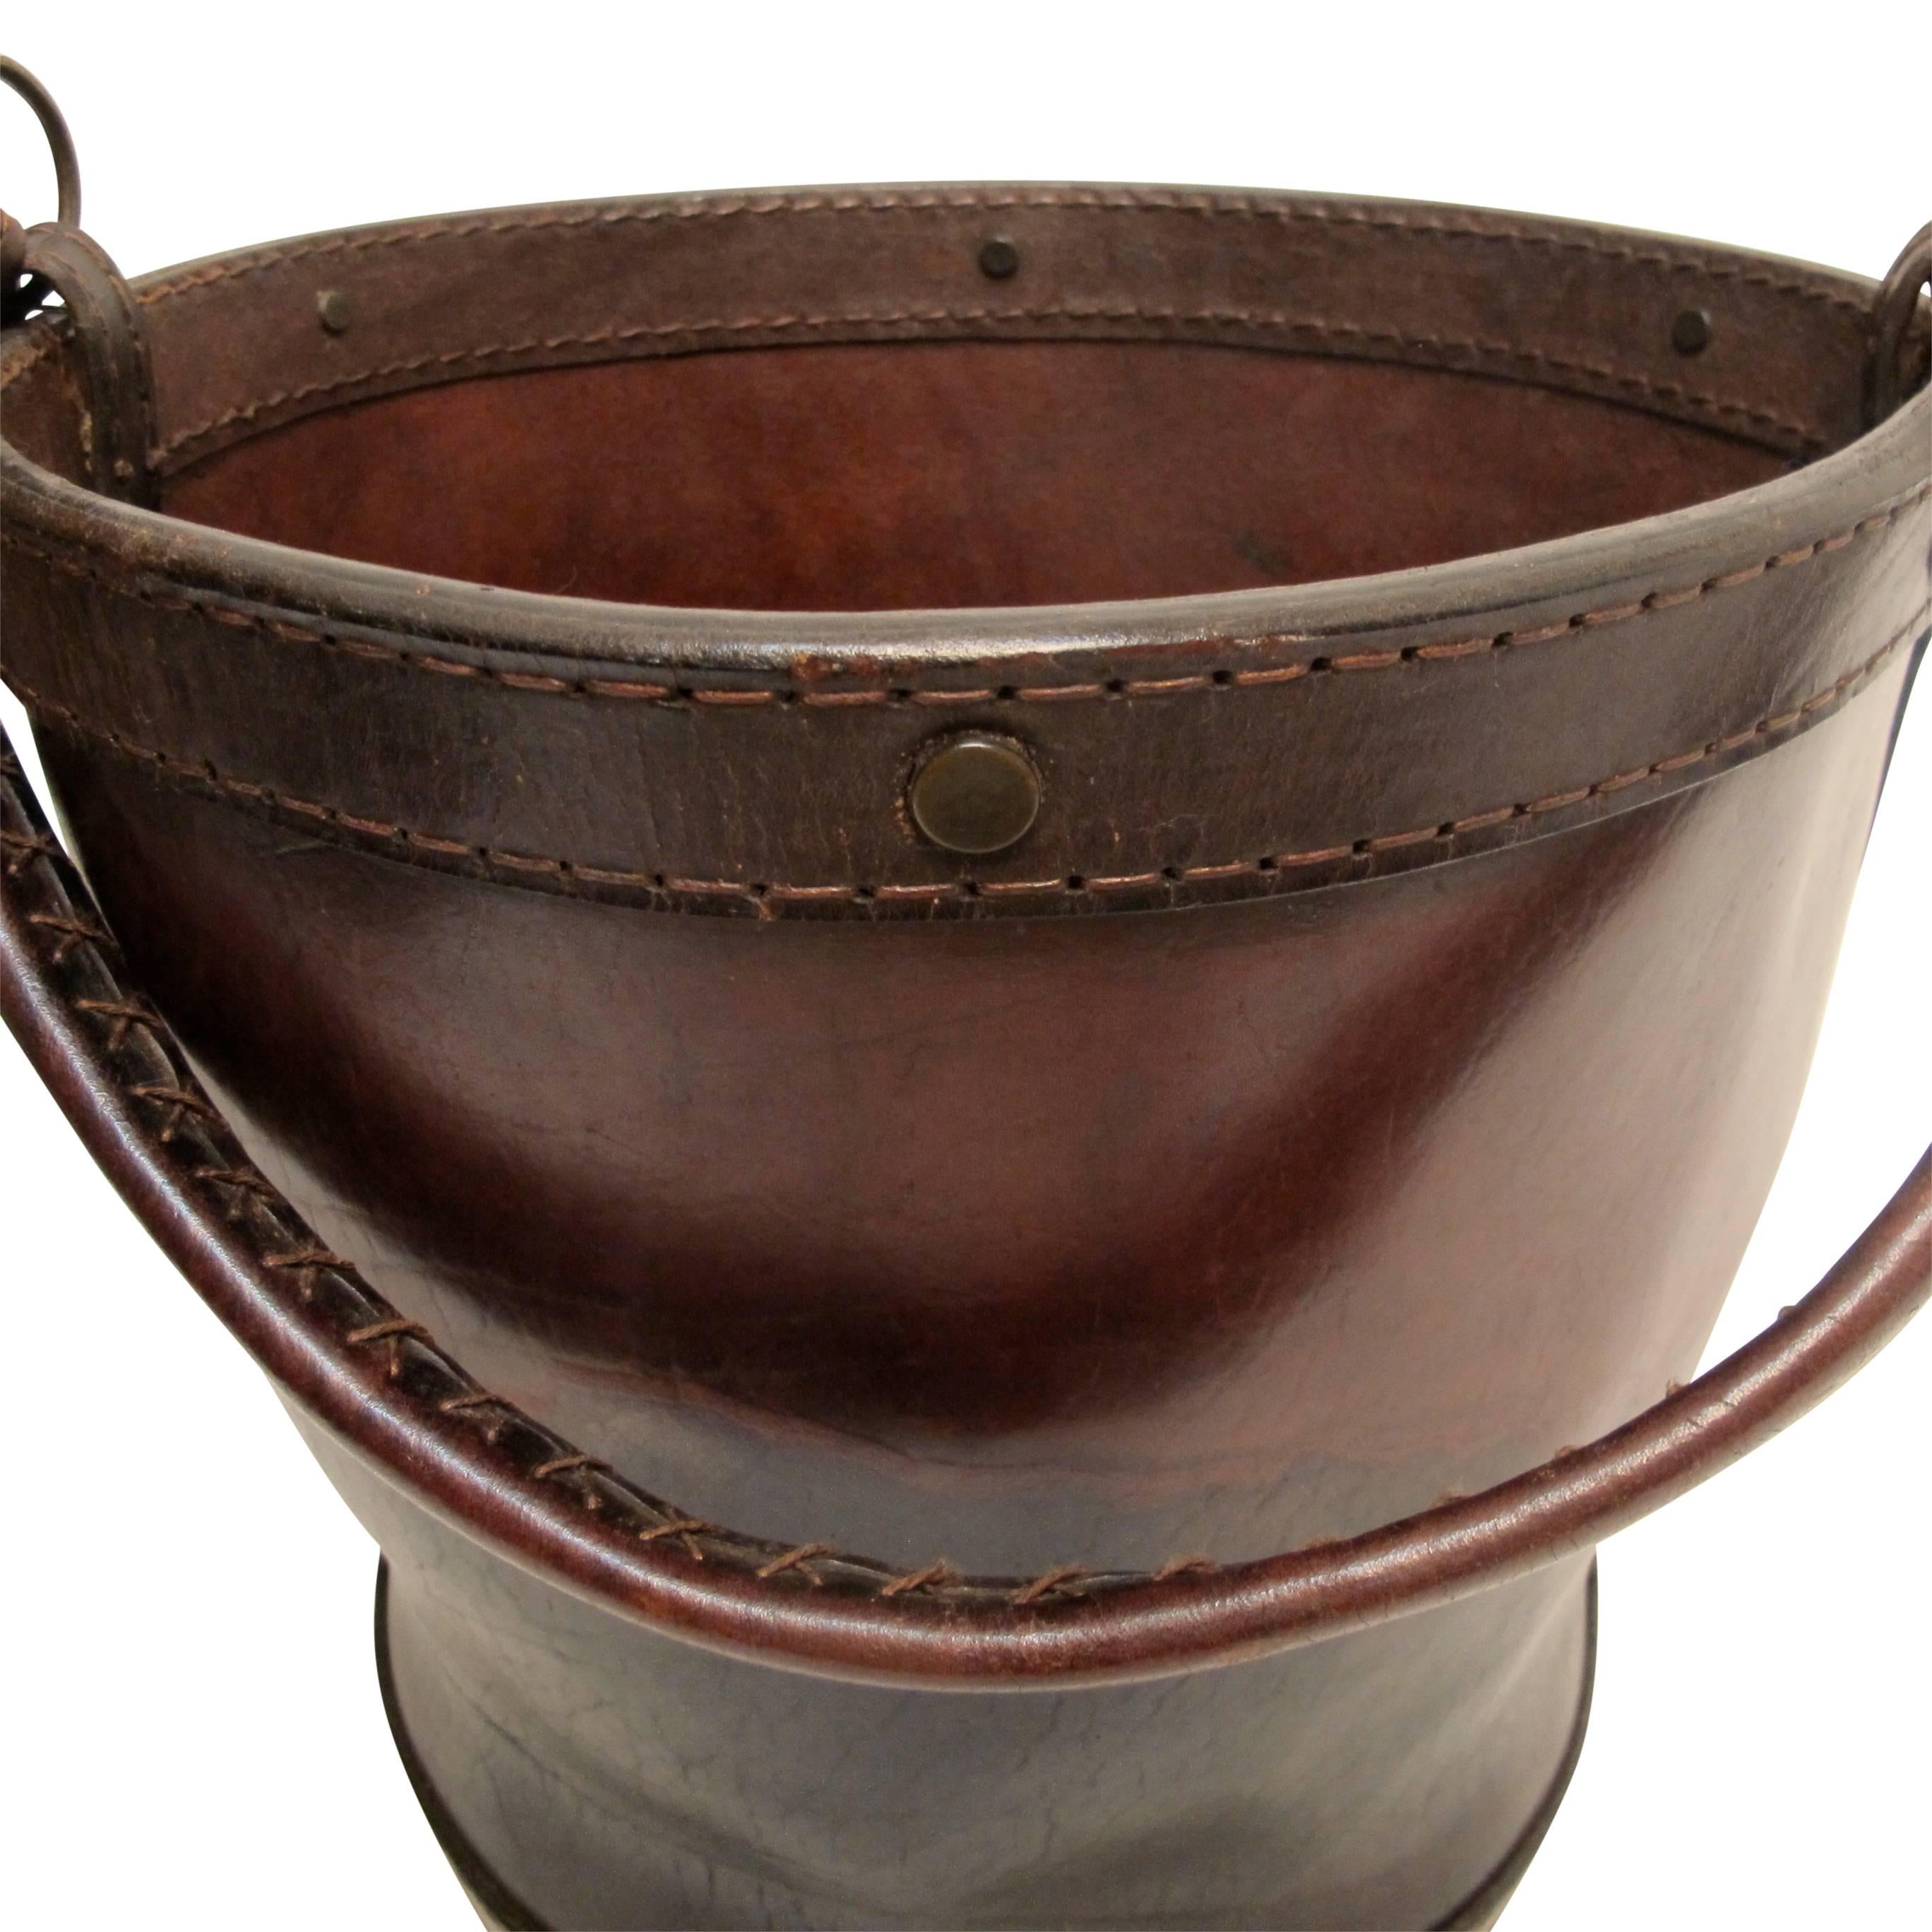 A large dark brown leather water or feed bucket, England, late 19th century.
Would make a handsome waste basket or used next to the fireplace.